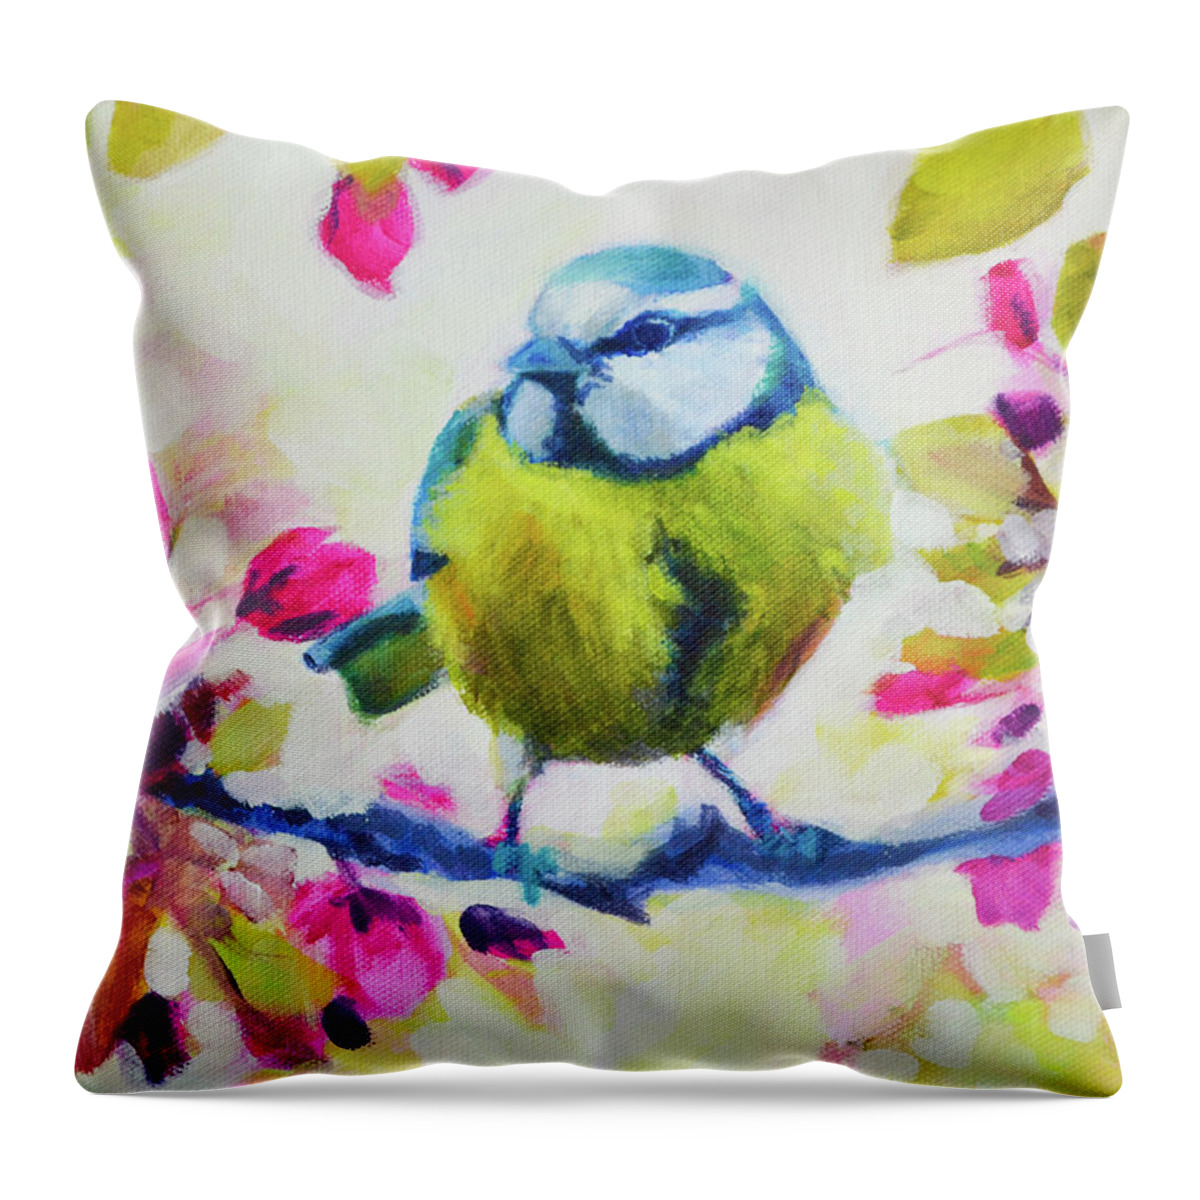 Birds Throw Pillow featuring the painting Bright Little Bird by Amanda Schwabe